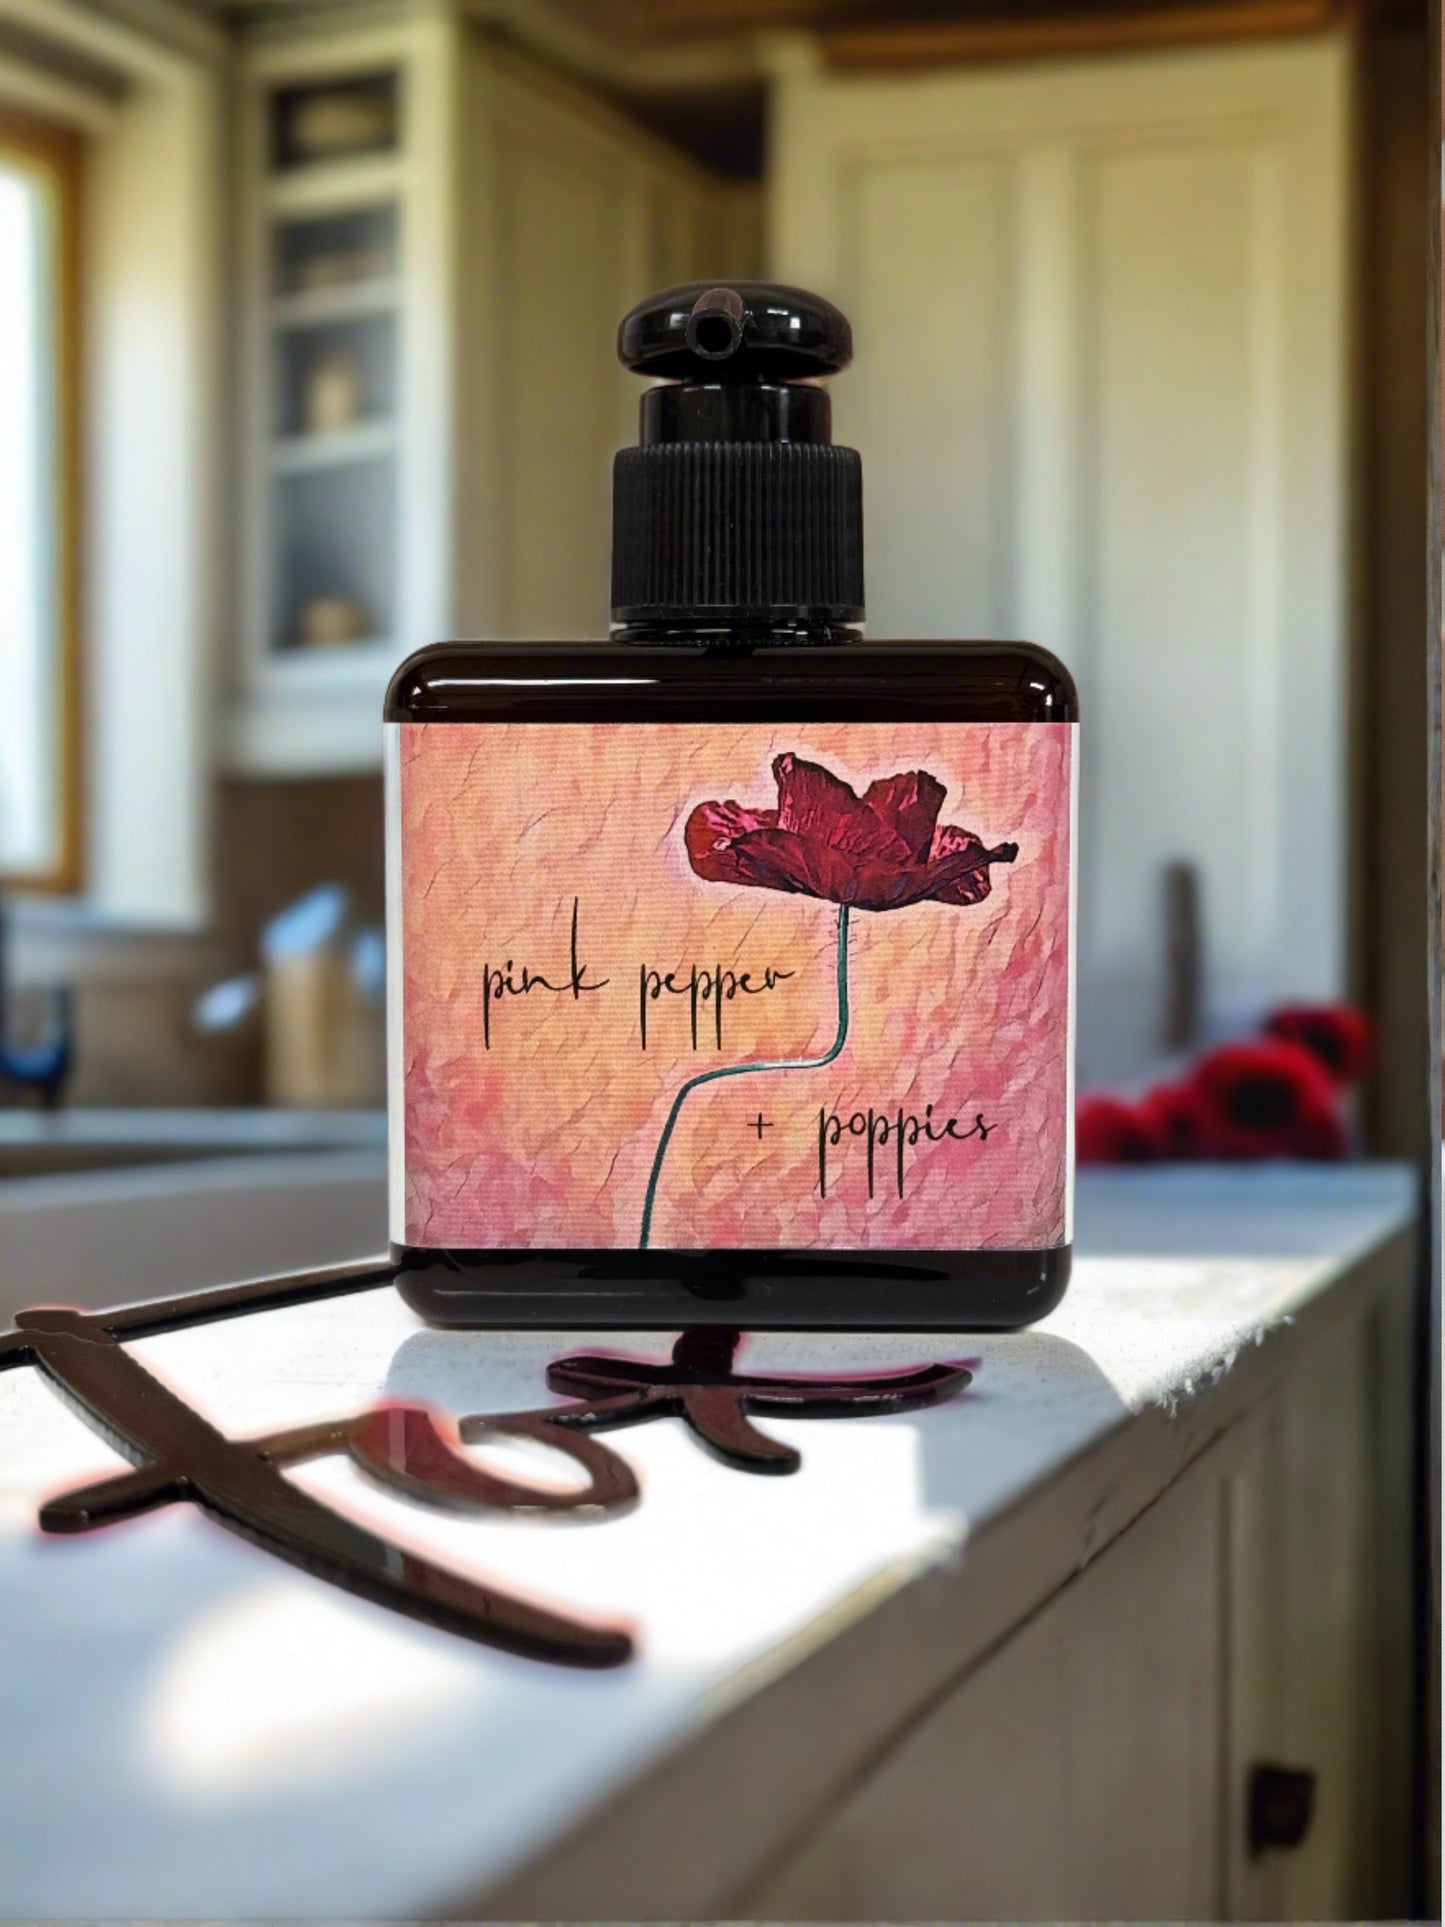 PINK PEPPER + POPPIES PREMIUM BEESWAX LOTION